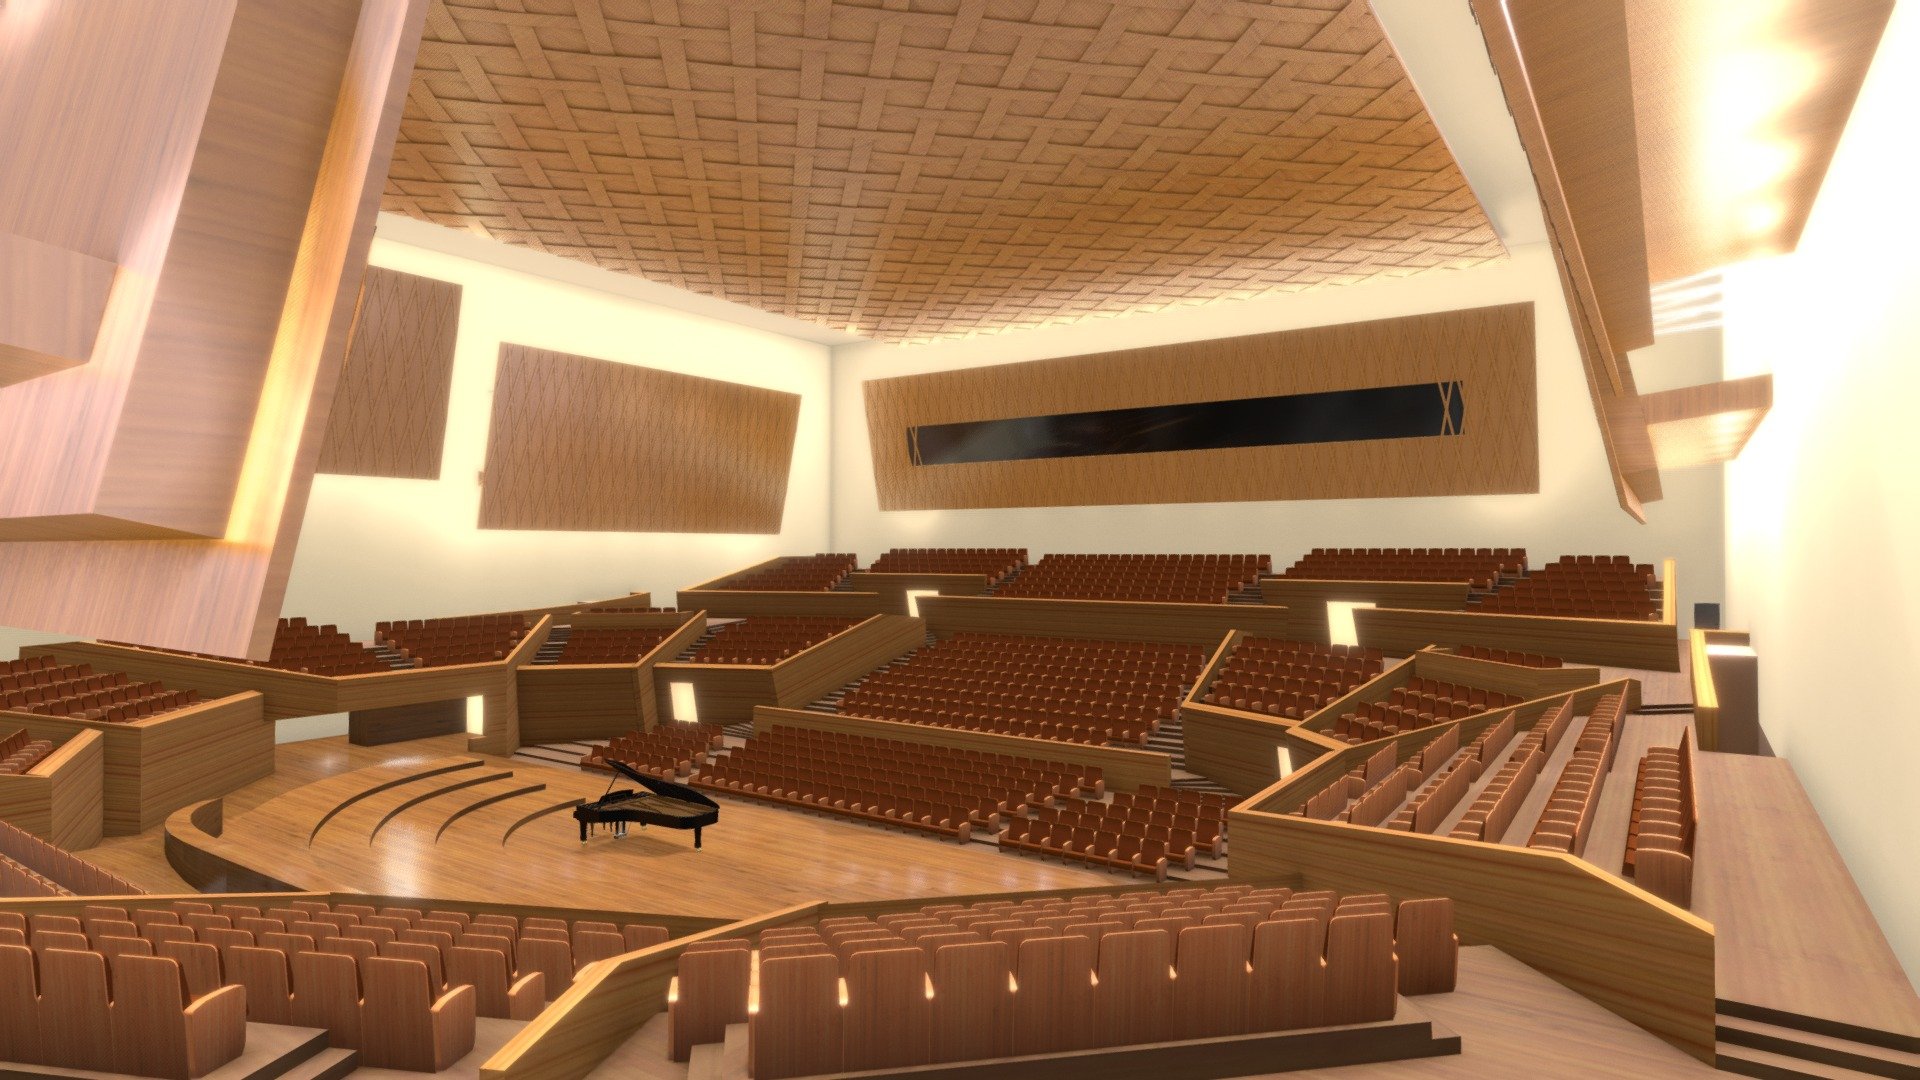 Virtual Reality Concert Hall prepared for VR.
Format FBX file size : Just 5.5MB
Ready to use.

Click on the link to see more models : https://sketchfab.com/GbehnamG/store

If you need customized 3d models , feel free to contact at: mr.gbehnamg@yahoo.com - Concert Hall | Amphitheater VR 2021 (5.5MB FBX) - Buy Royalty Free 3D model by BehNaM (@GbehnamG) 3d model